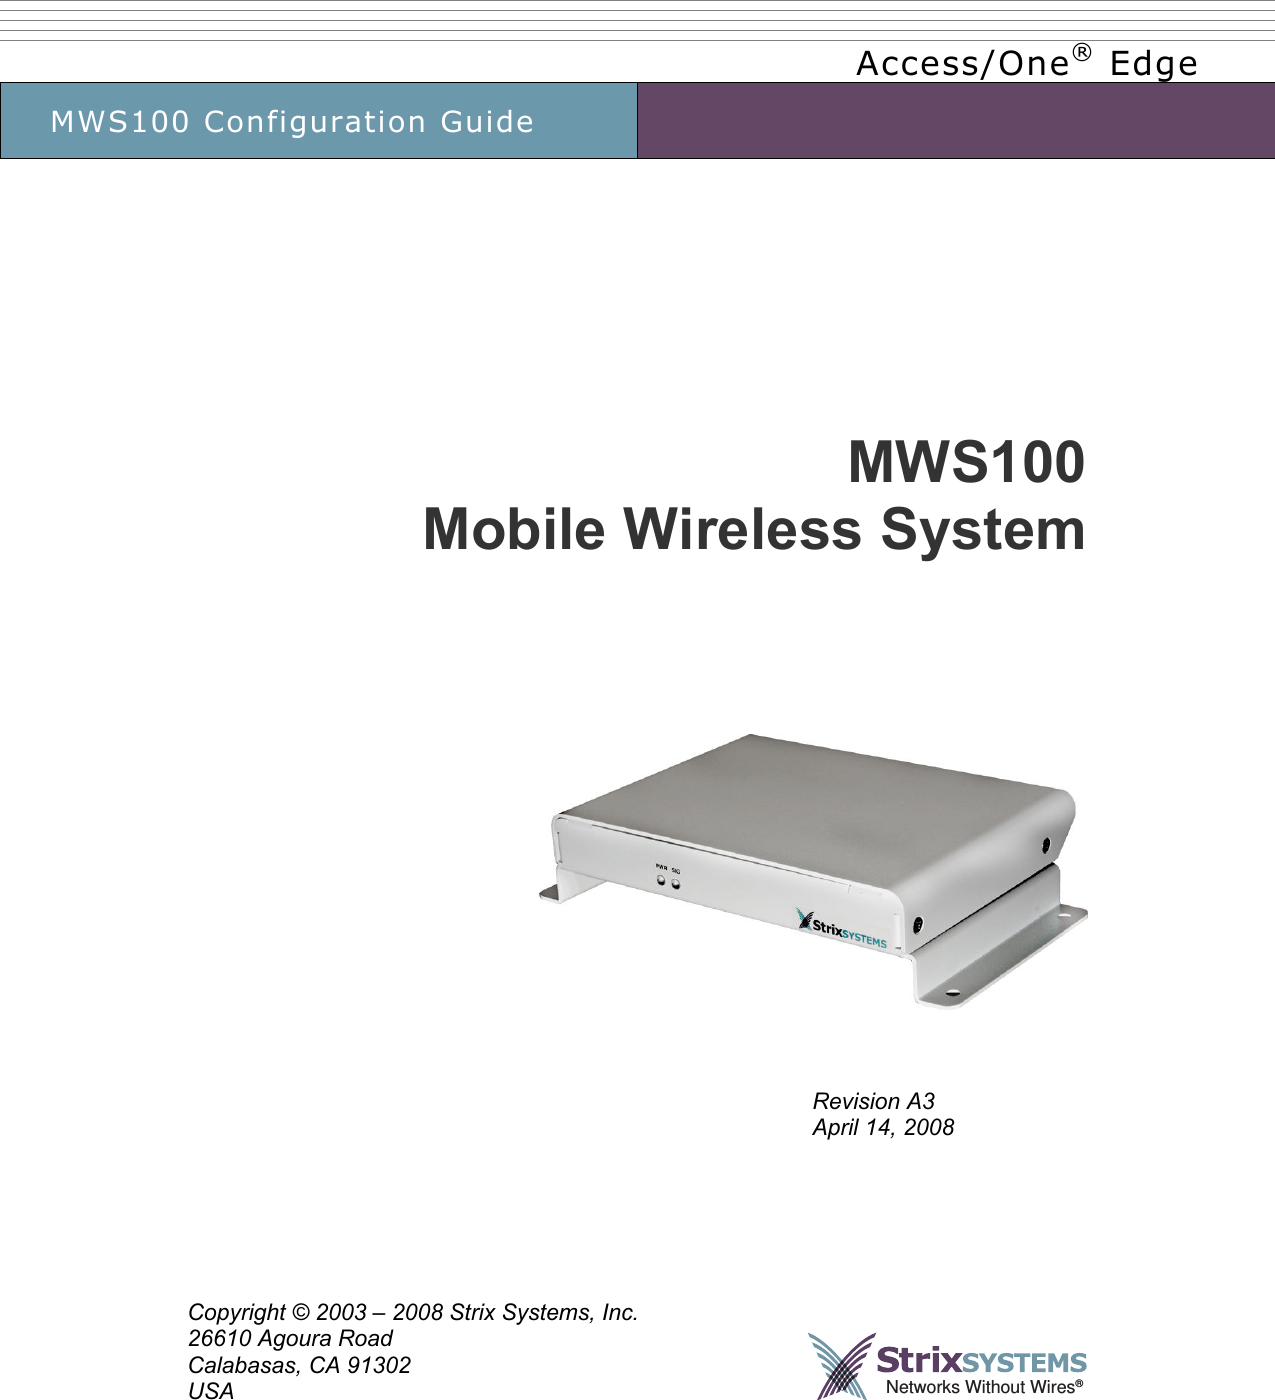      Access/One® Edge MWS100 Configuration Guide                 MWS100 Mobile Wireless System        Revision A3 April 14, 2008       Copyright © 2003 – 2008 Strix Systems, Inc. 26610 Agoura Road Calabasas, CA 91302 USA    Networks Without Wires®